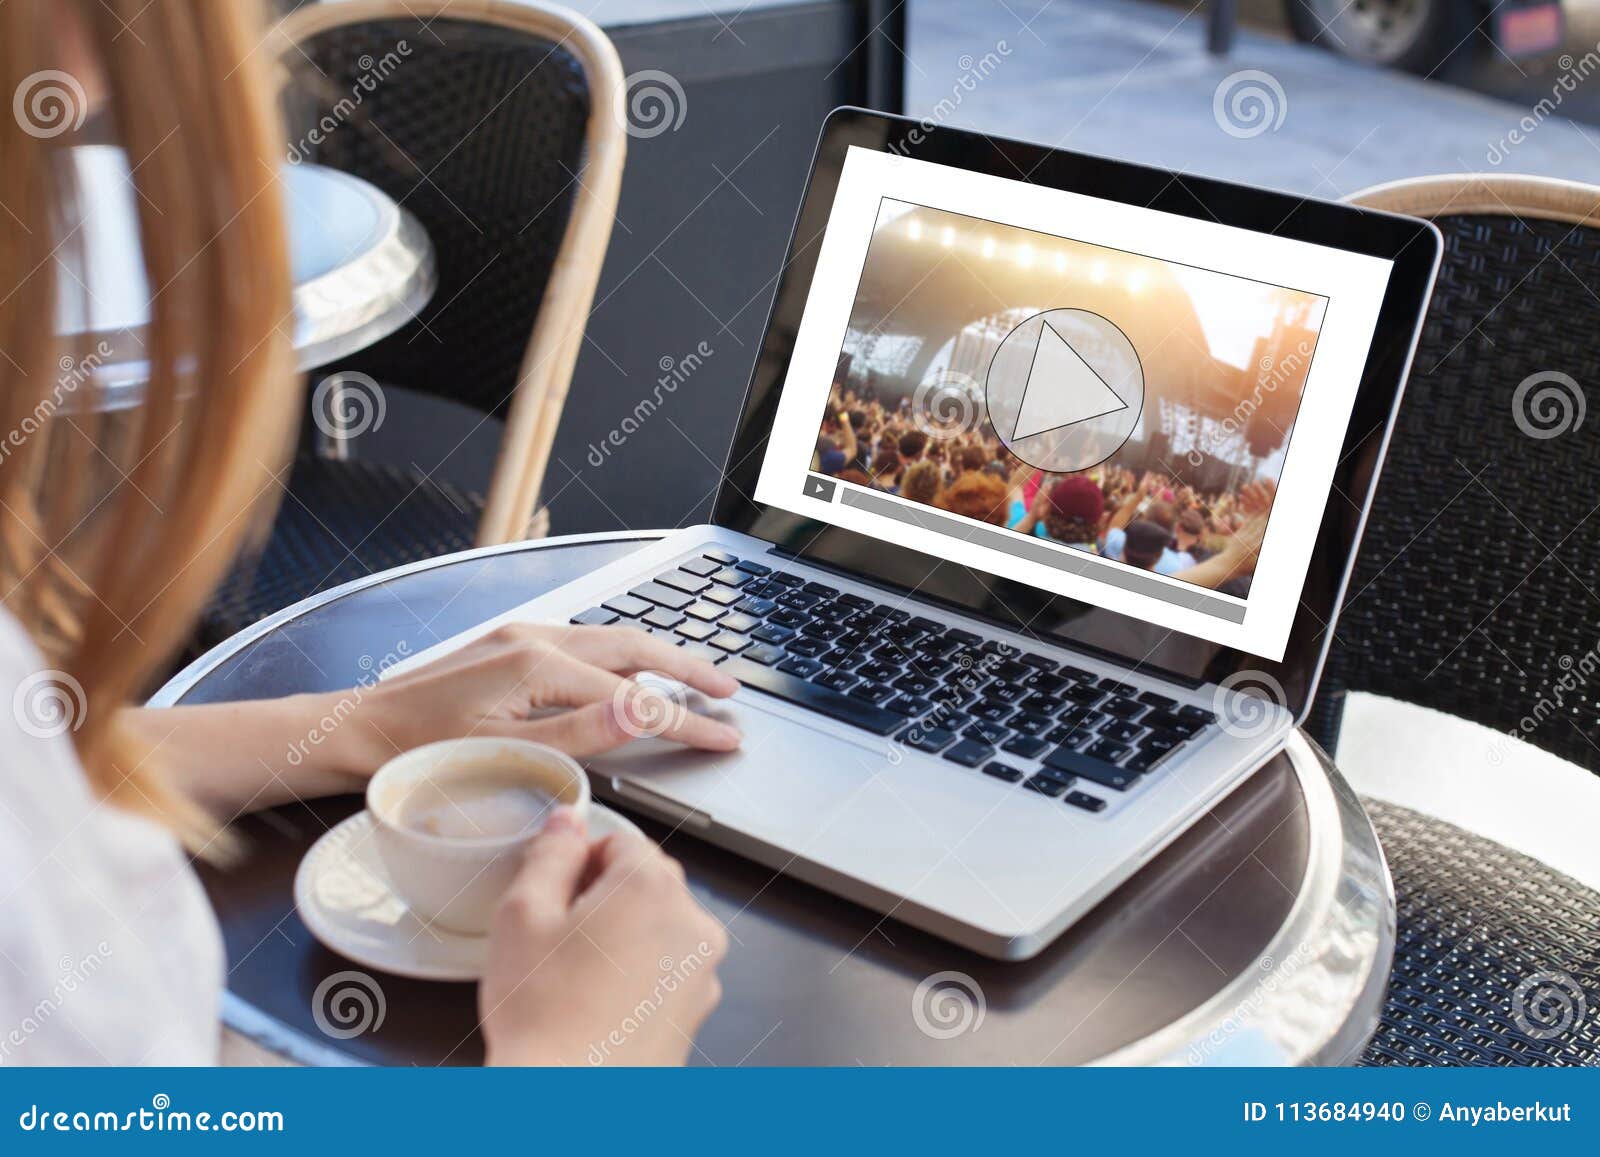 video streaming, online concert, woman watching live music clip on internet